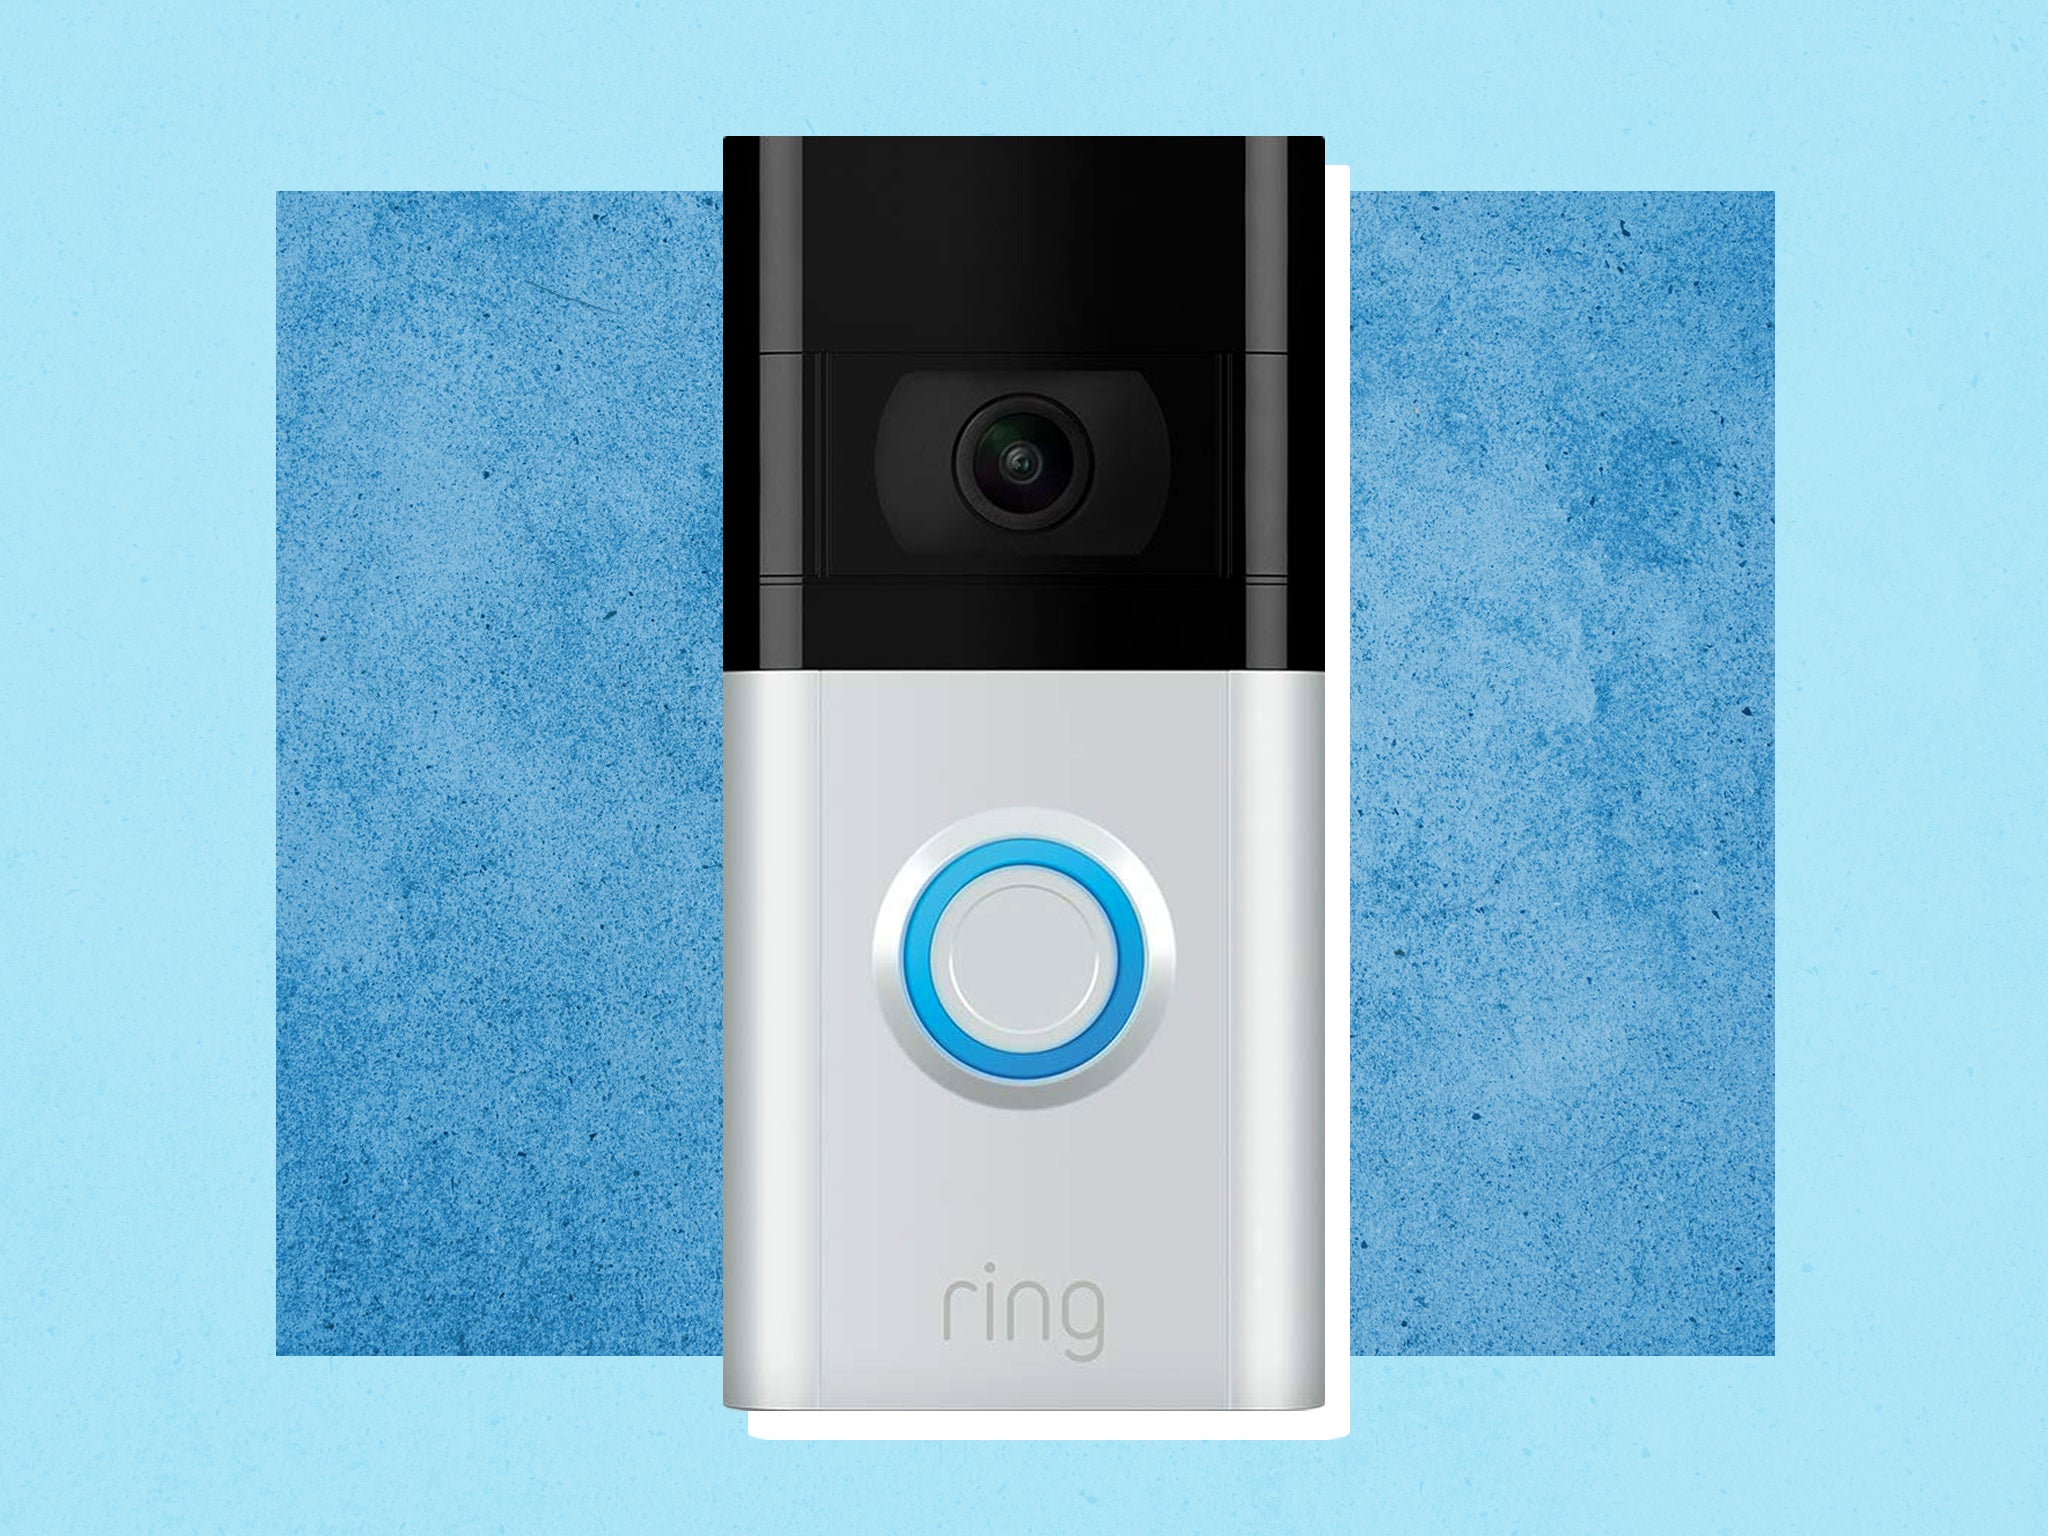 Amazon Ring video doorbell deal save over 40 per cent The Independent pic